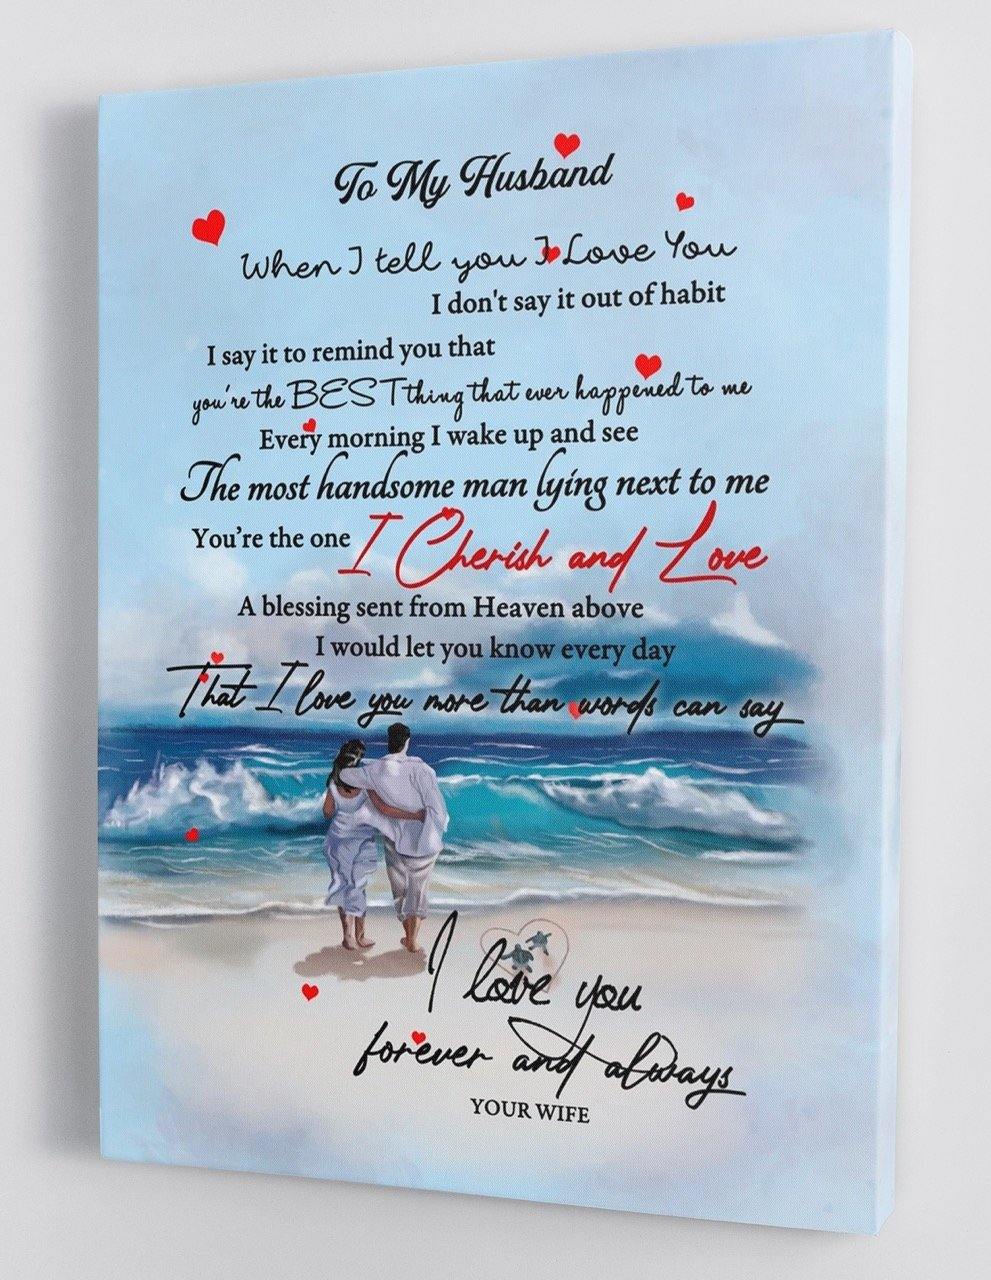 To My Husband - Love From Your Wife - Framed Canvas Gift WH003 - DivesArt LLC